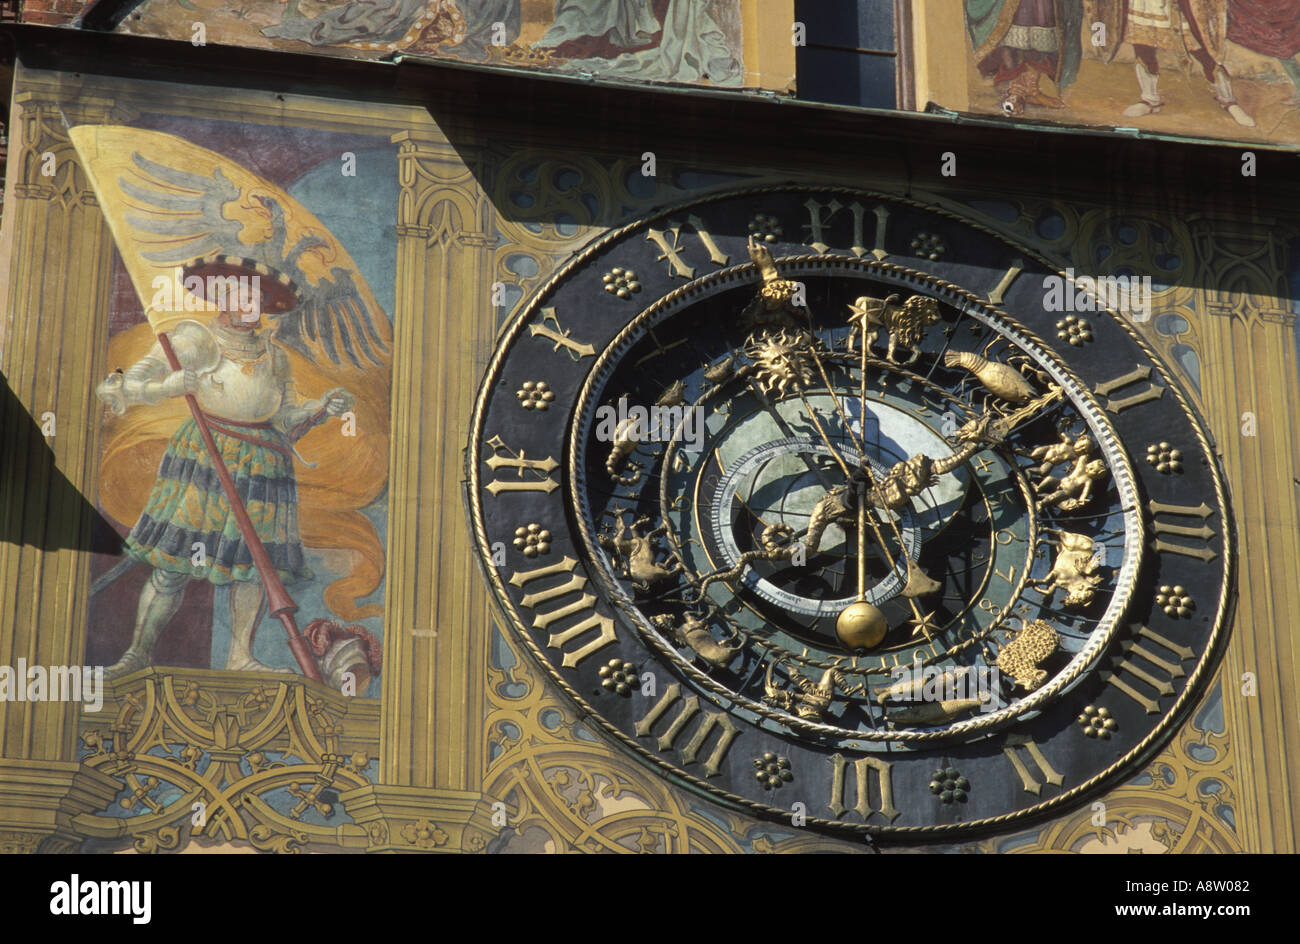 Astronomical clock at the city hall Ulm Germany Stock Photo